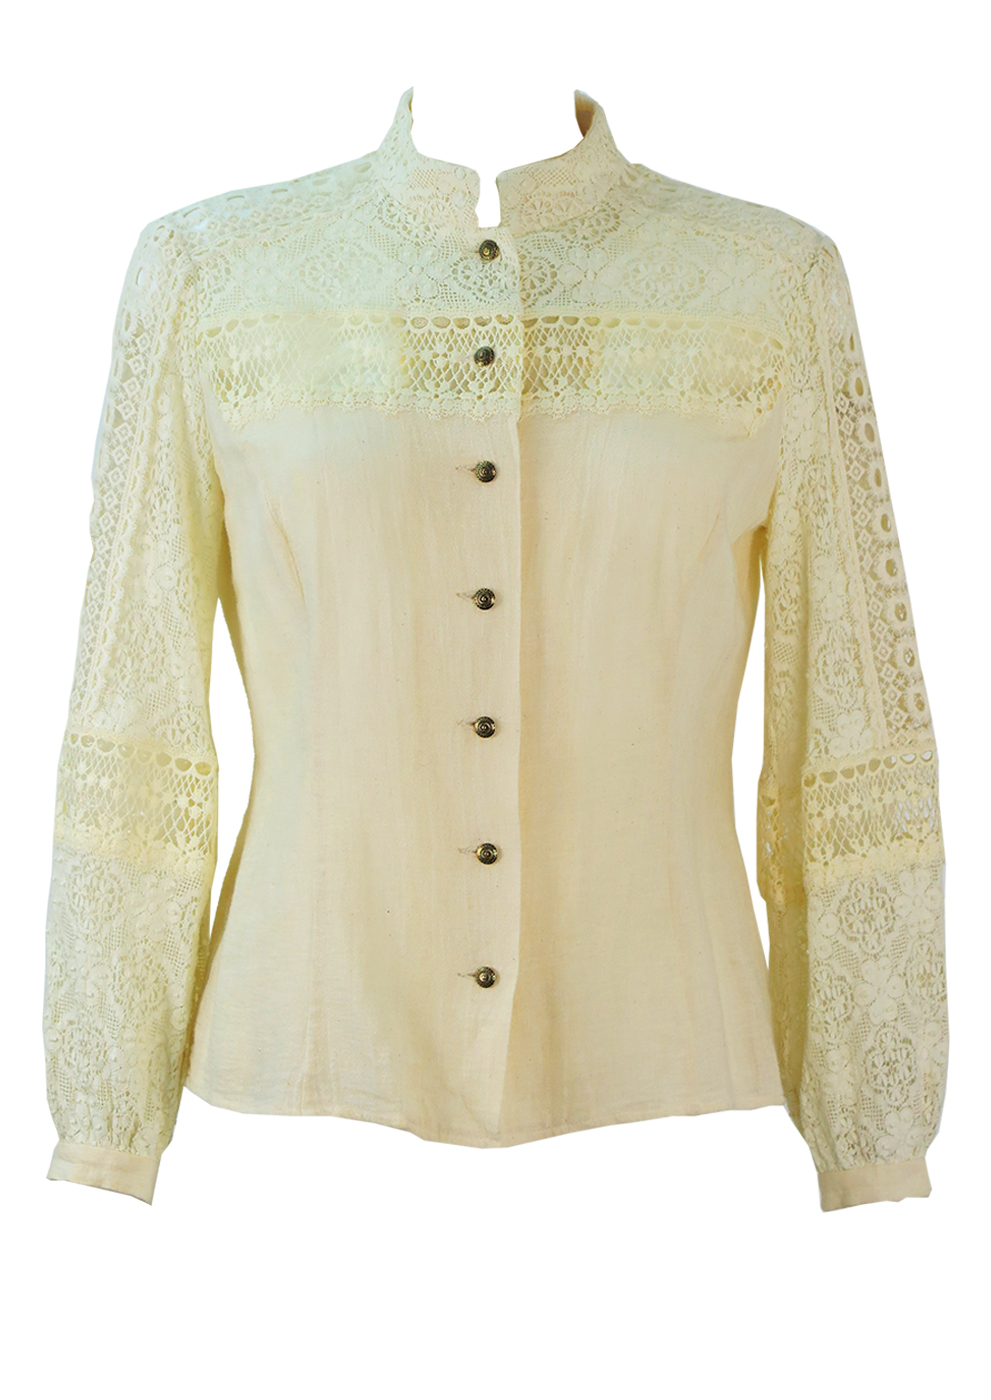 Victorian Style Cream Blouse with Intricate Lace Detail - M | Reign Vintage